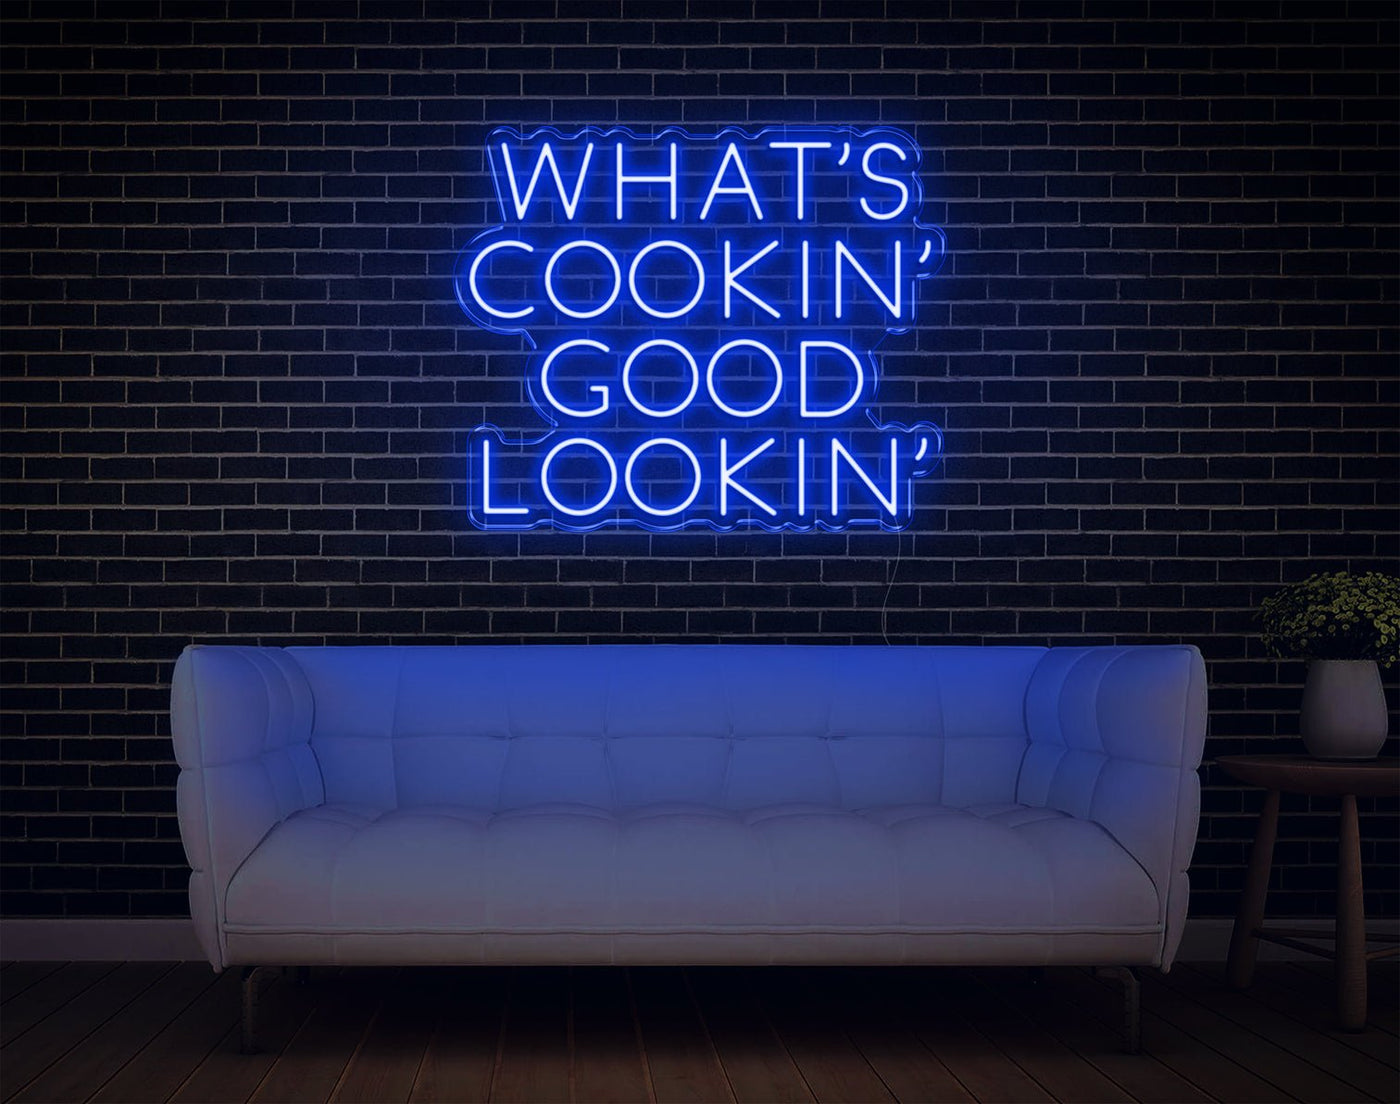 What's Cookin' Good Lookin' LED Neon Sign - 21inch x 25inchBlue